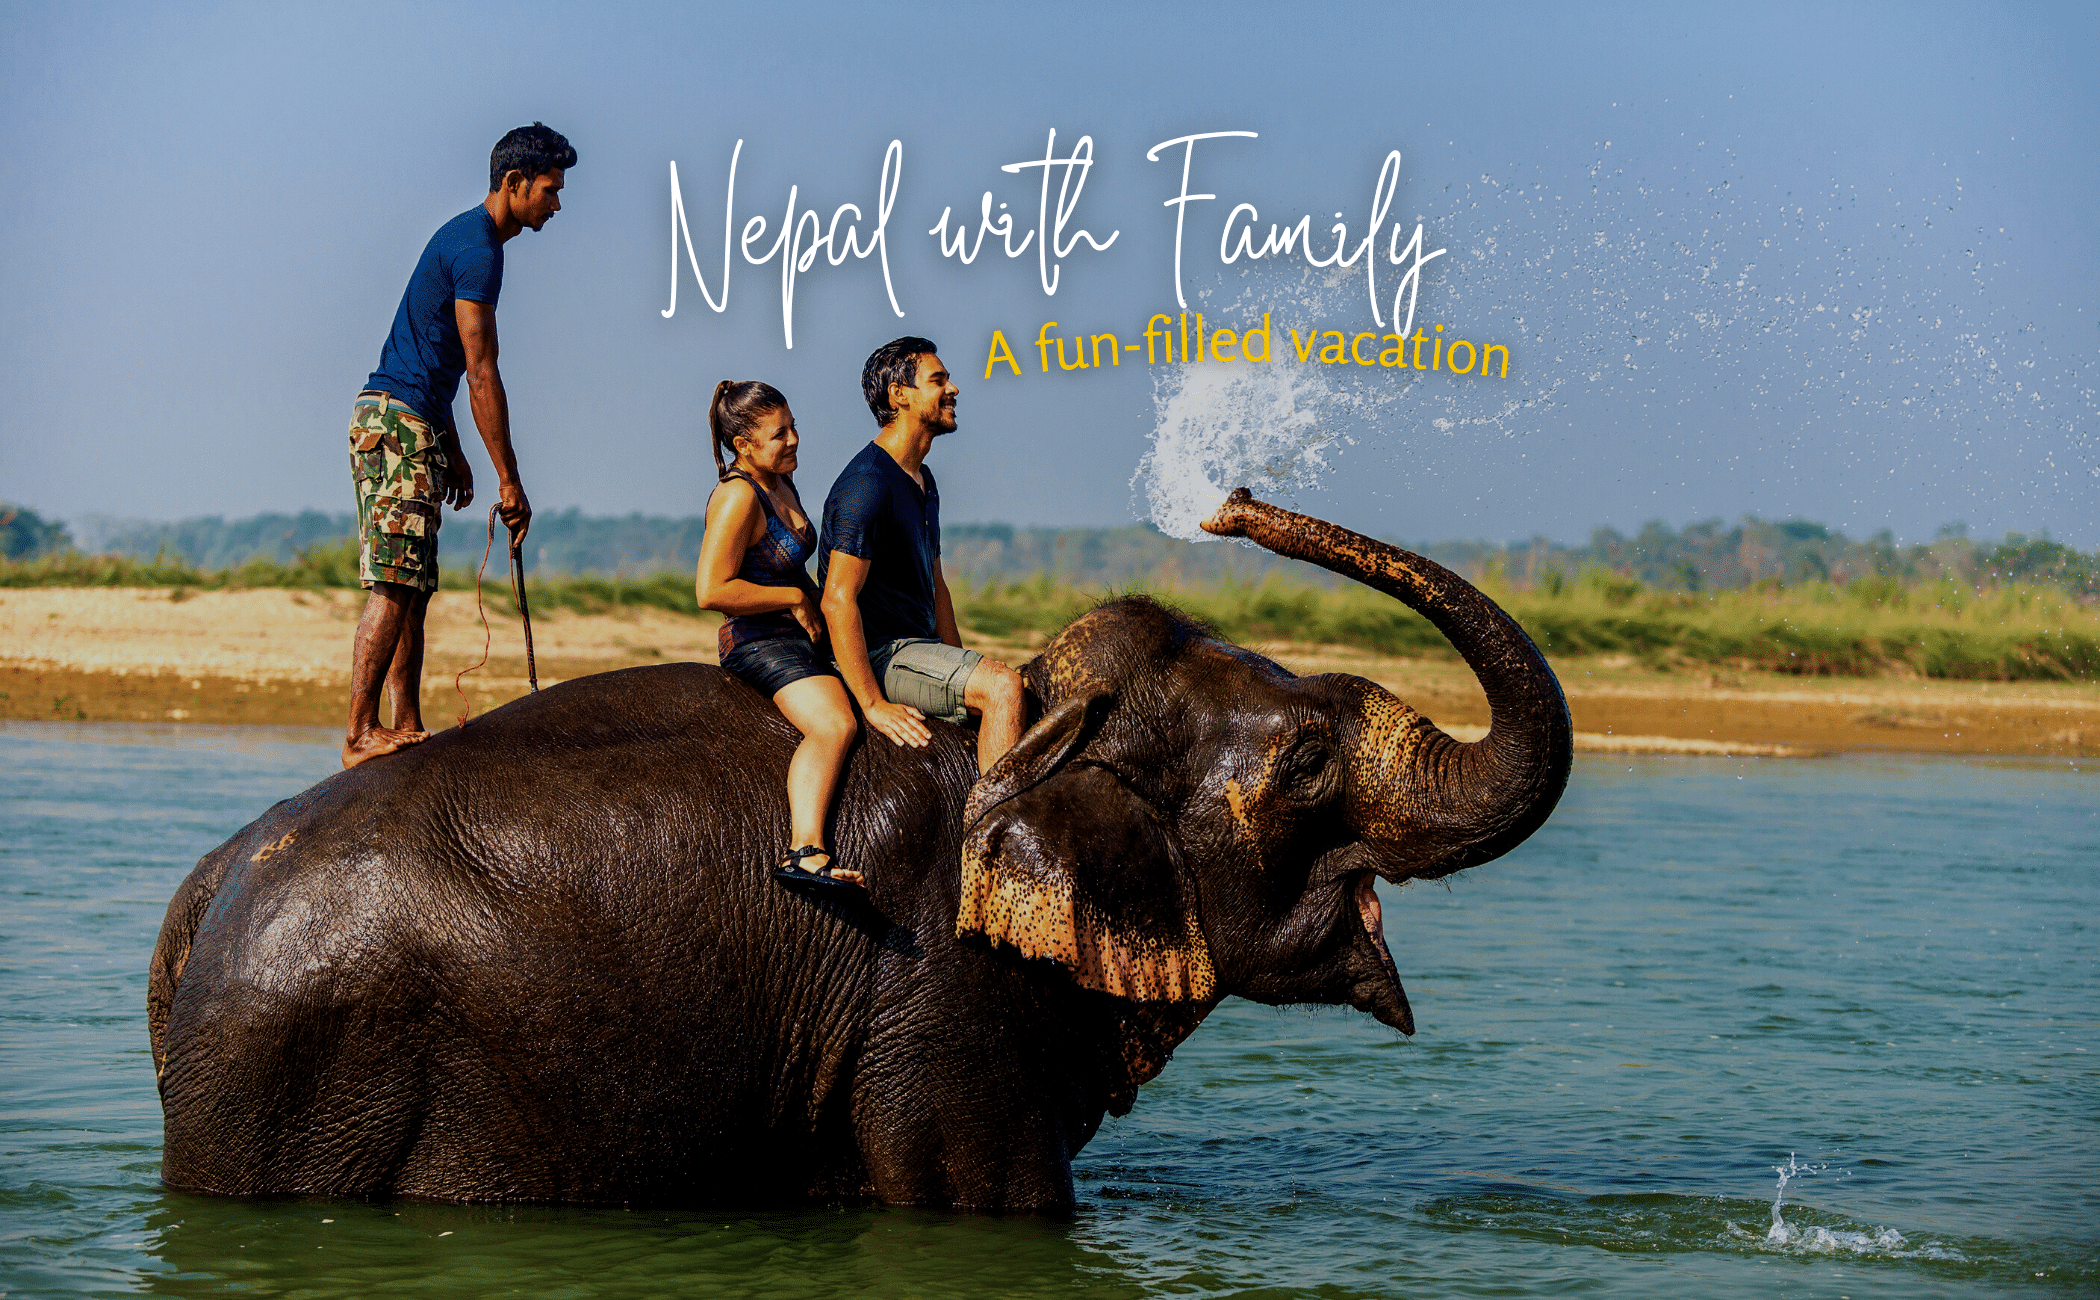 Have a fun family time on this tour to Nepal